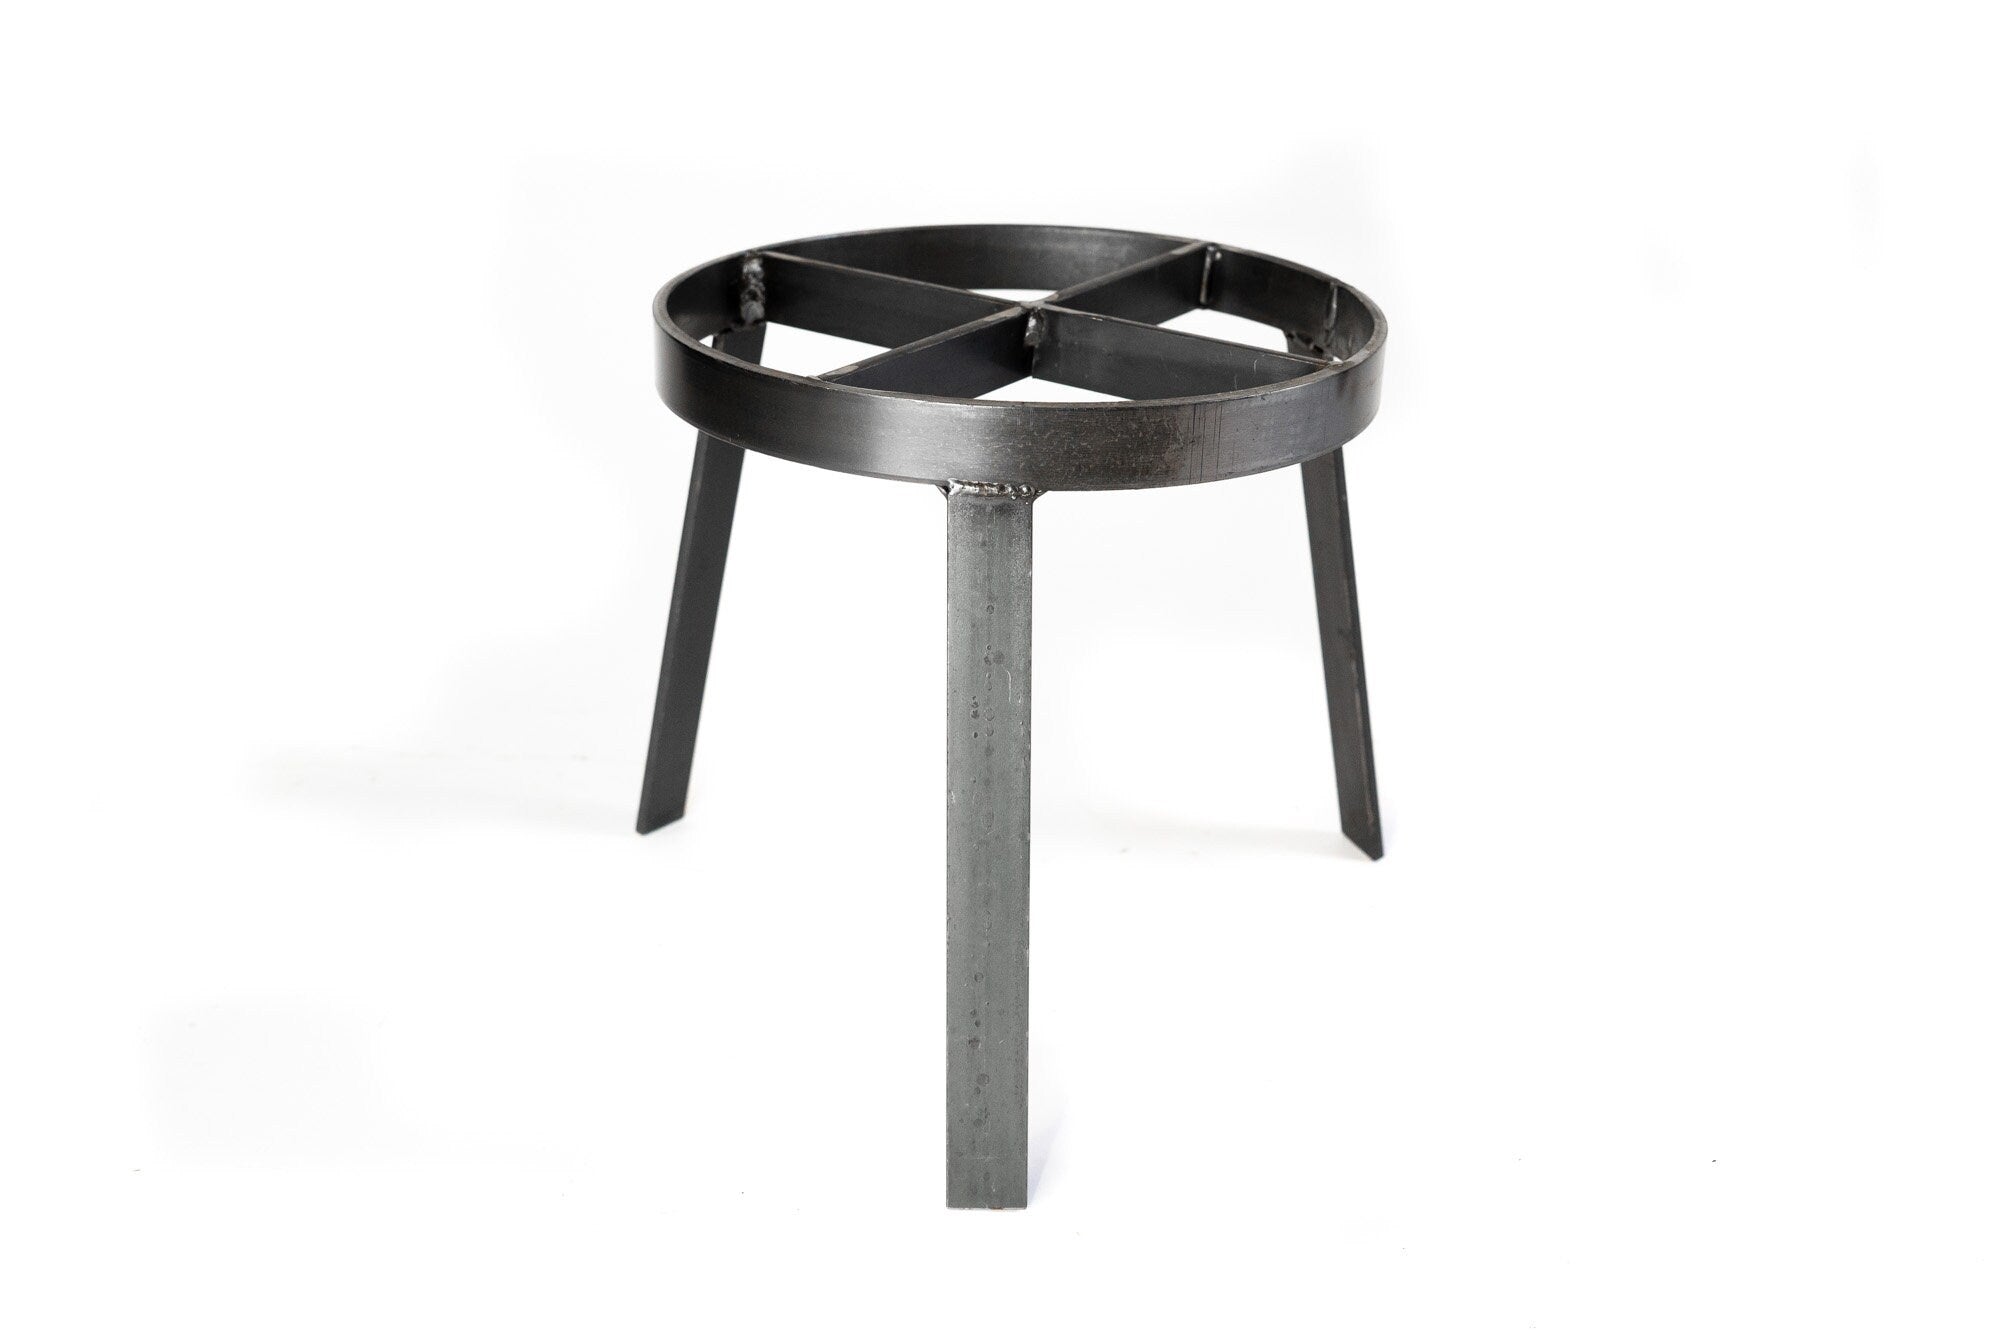 Gaucholife Grill 1 Stand Cooking Stands for the open fire. Heavy Duty Iron Contruccion 11.8 diameter